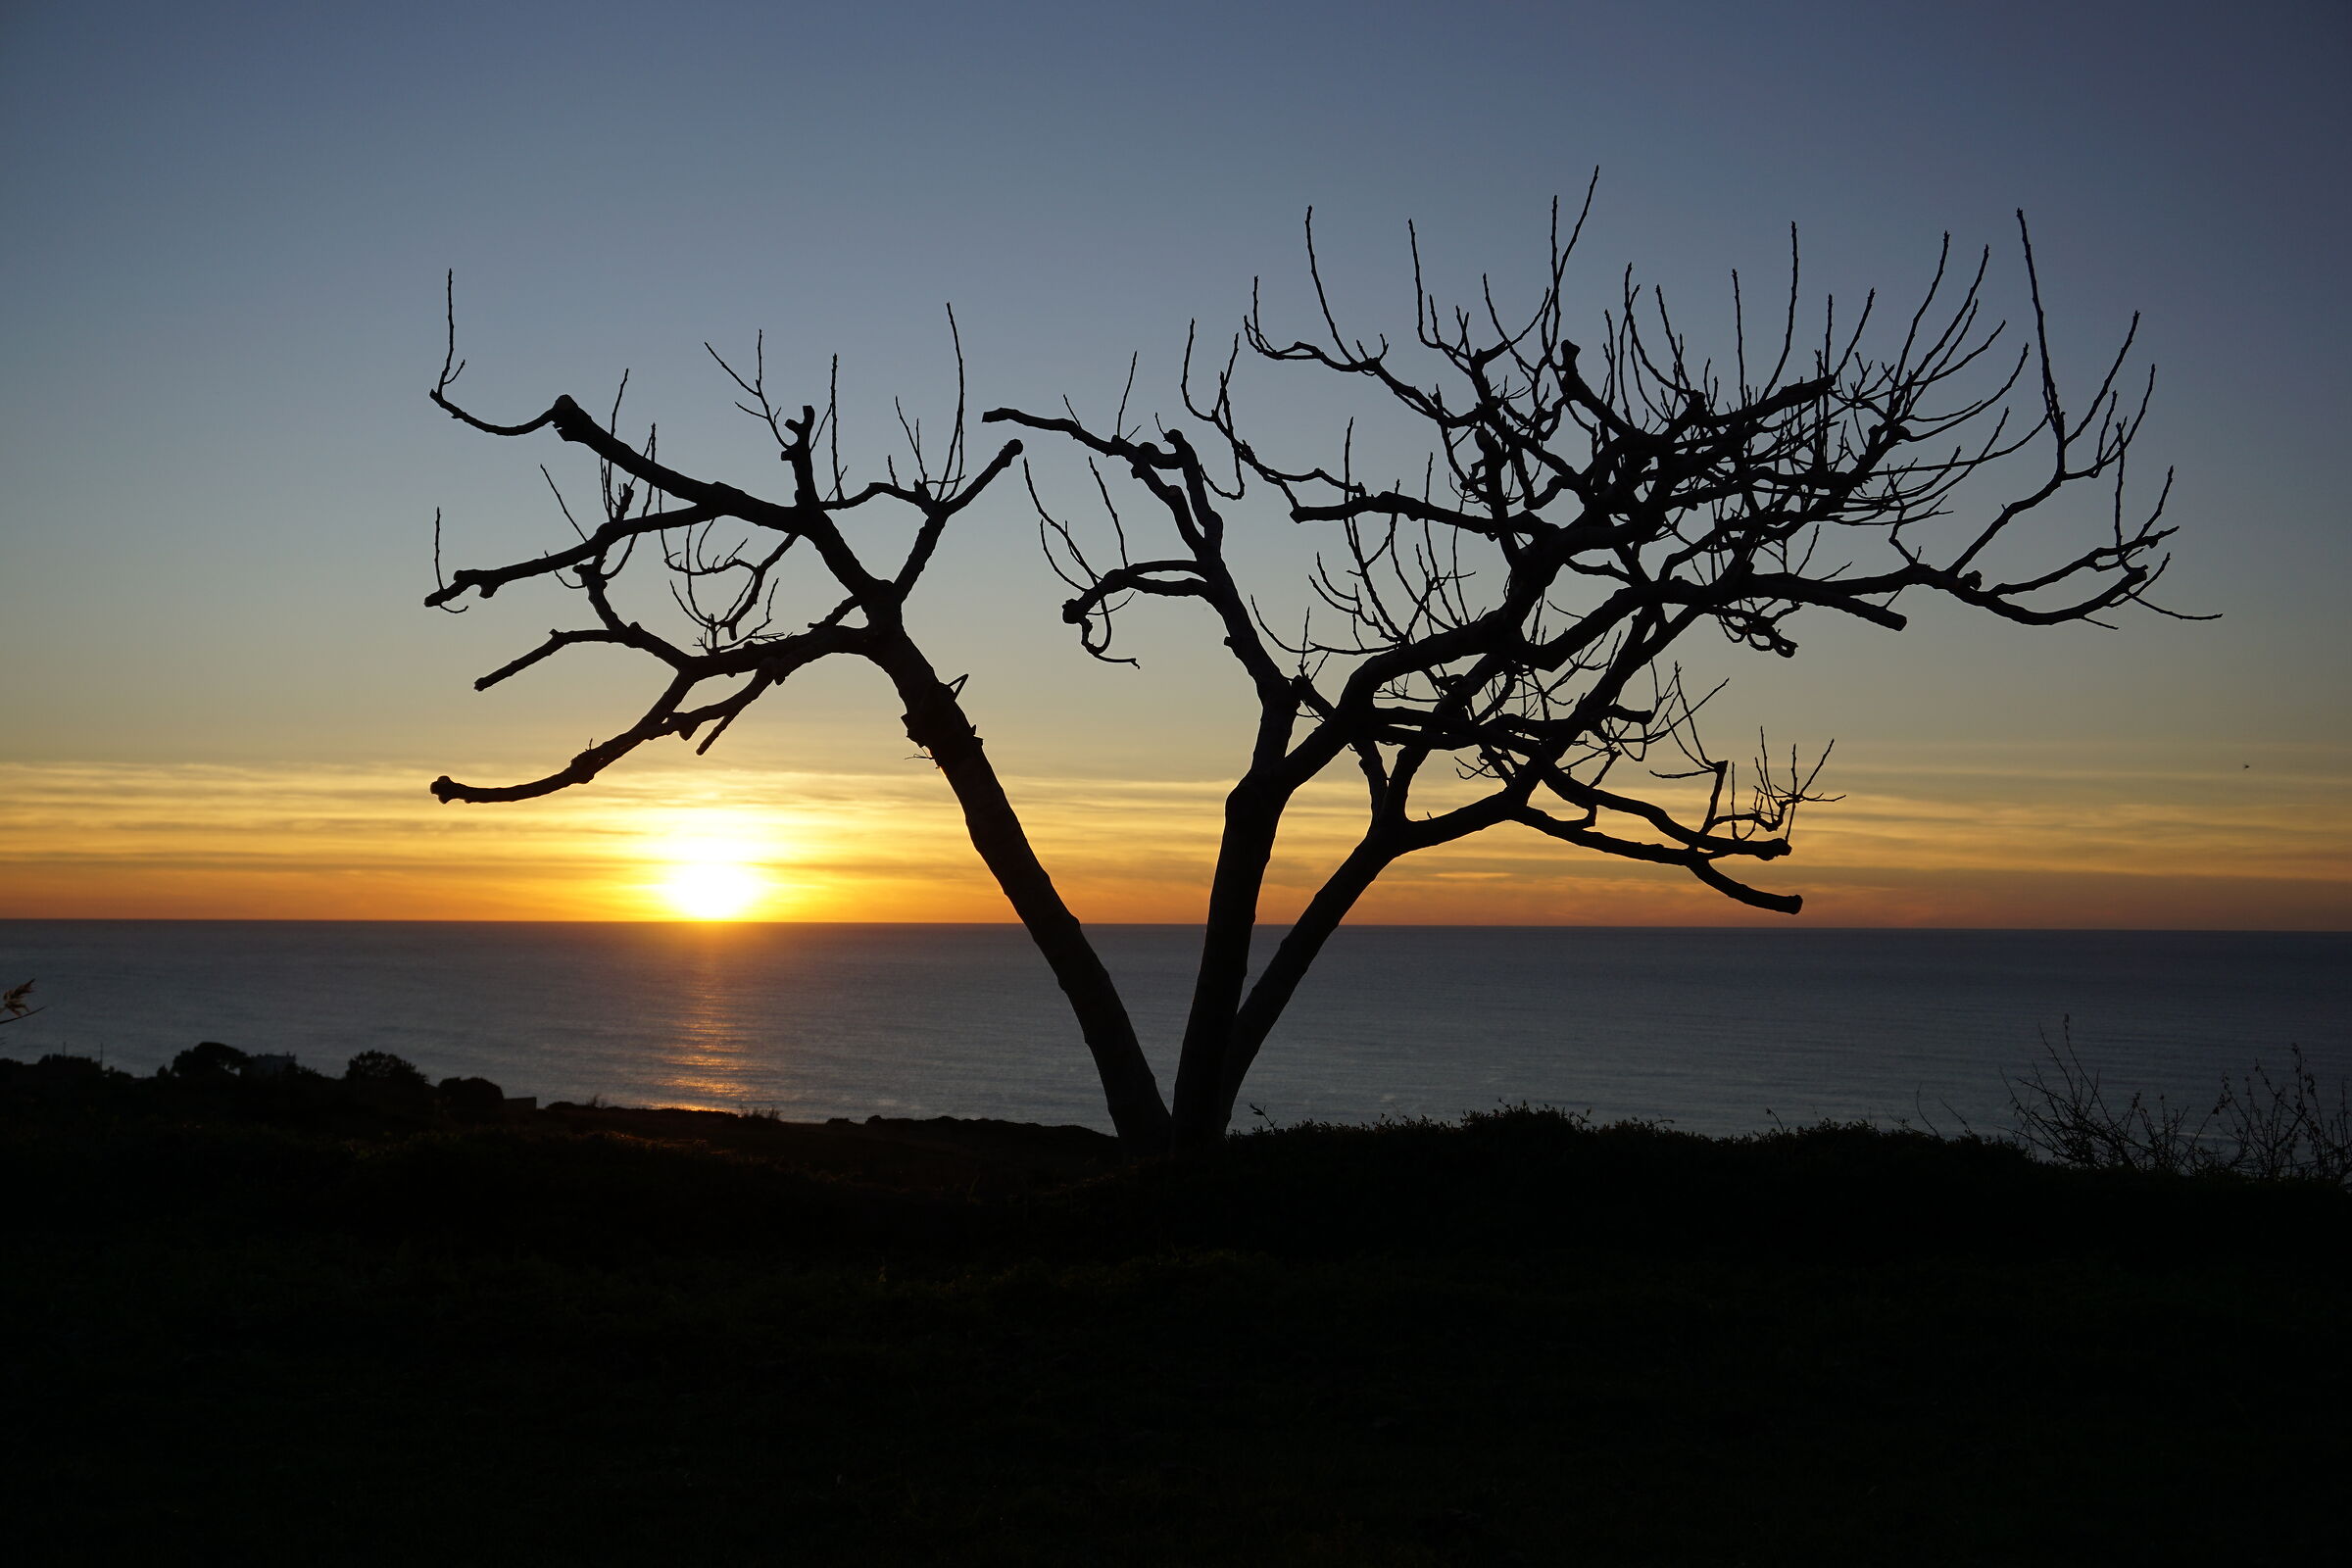 Sunset behind a bare fig tree...